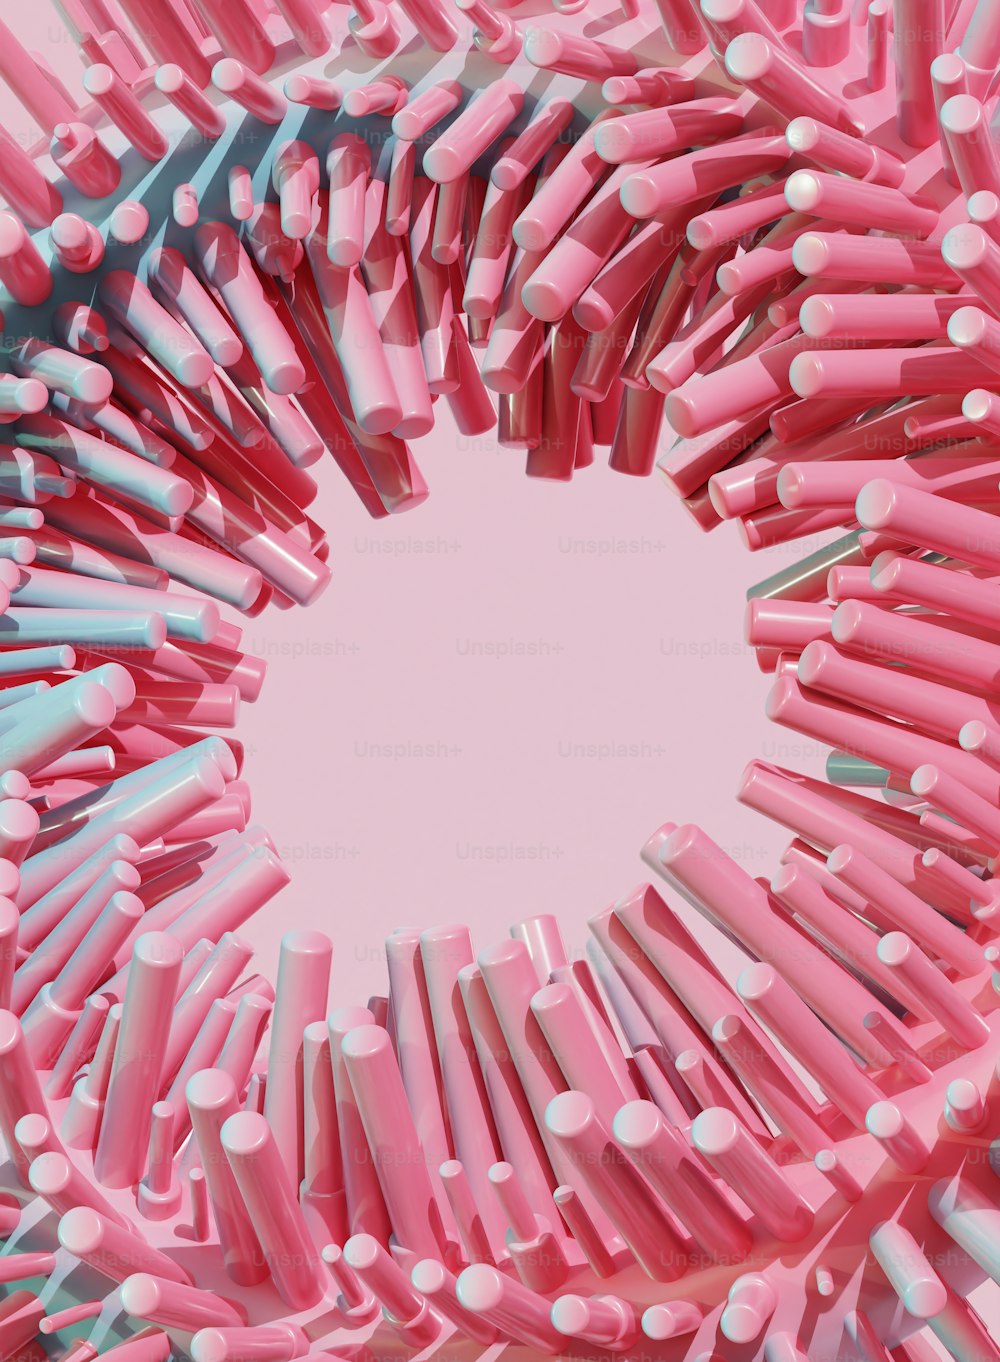 a circle of pink and blue toothbrushes